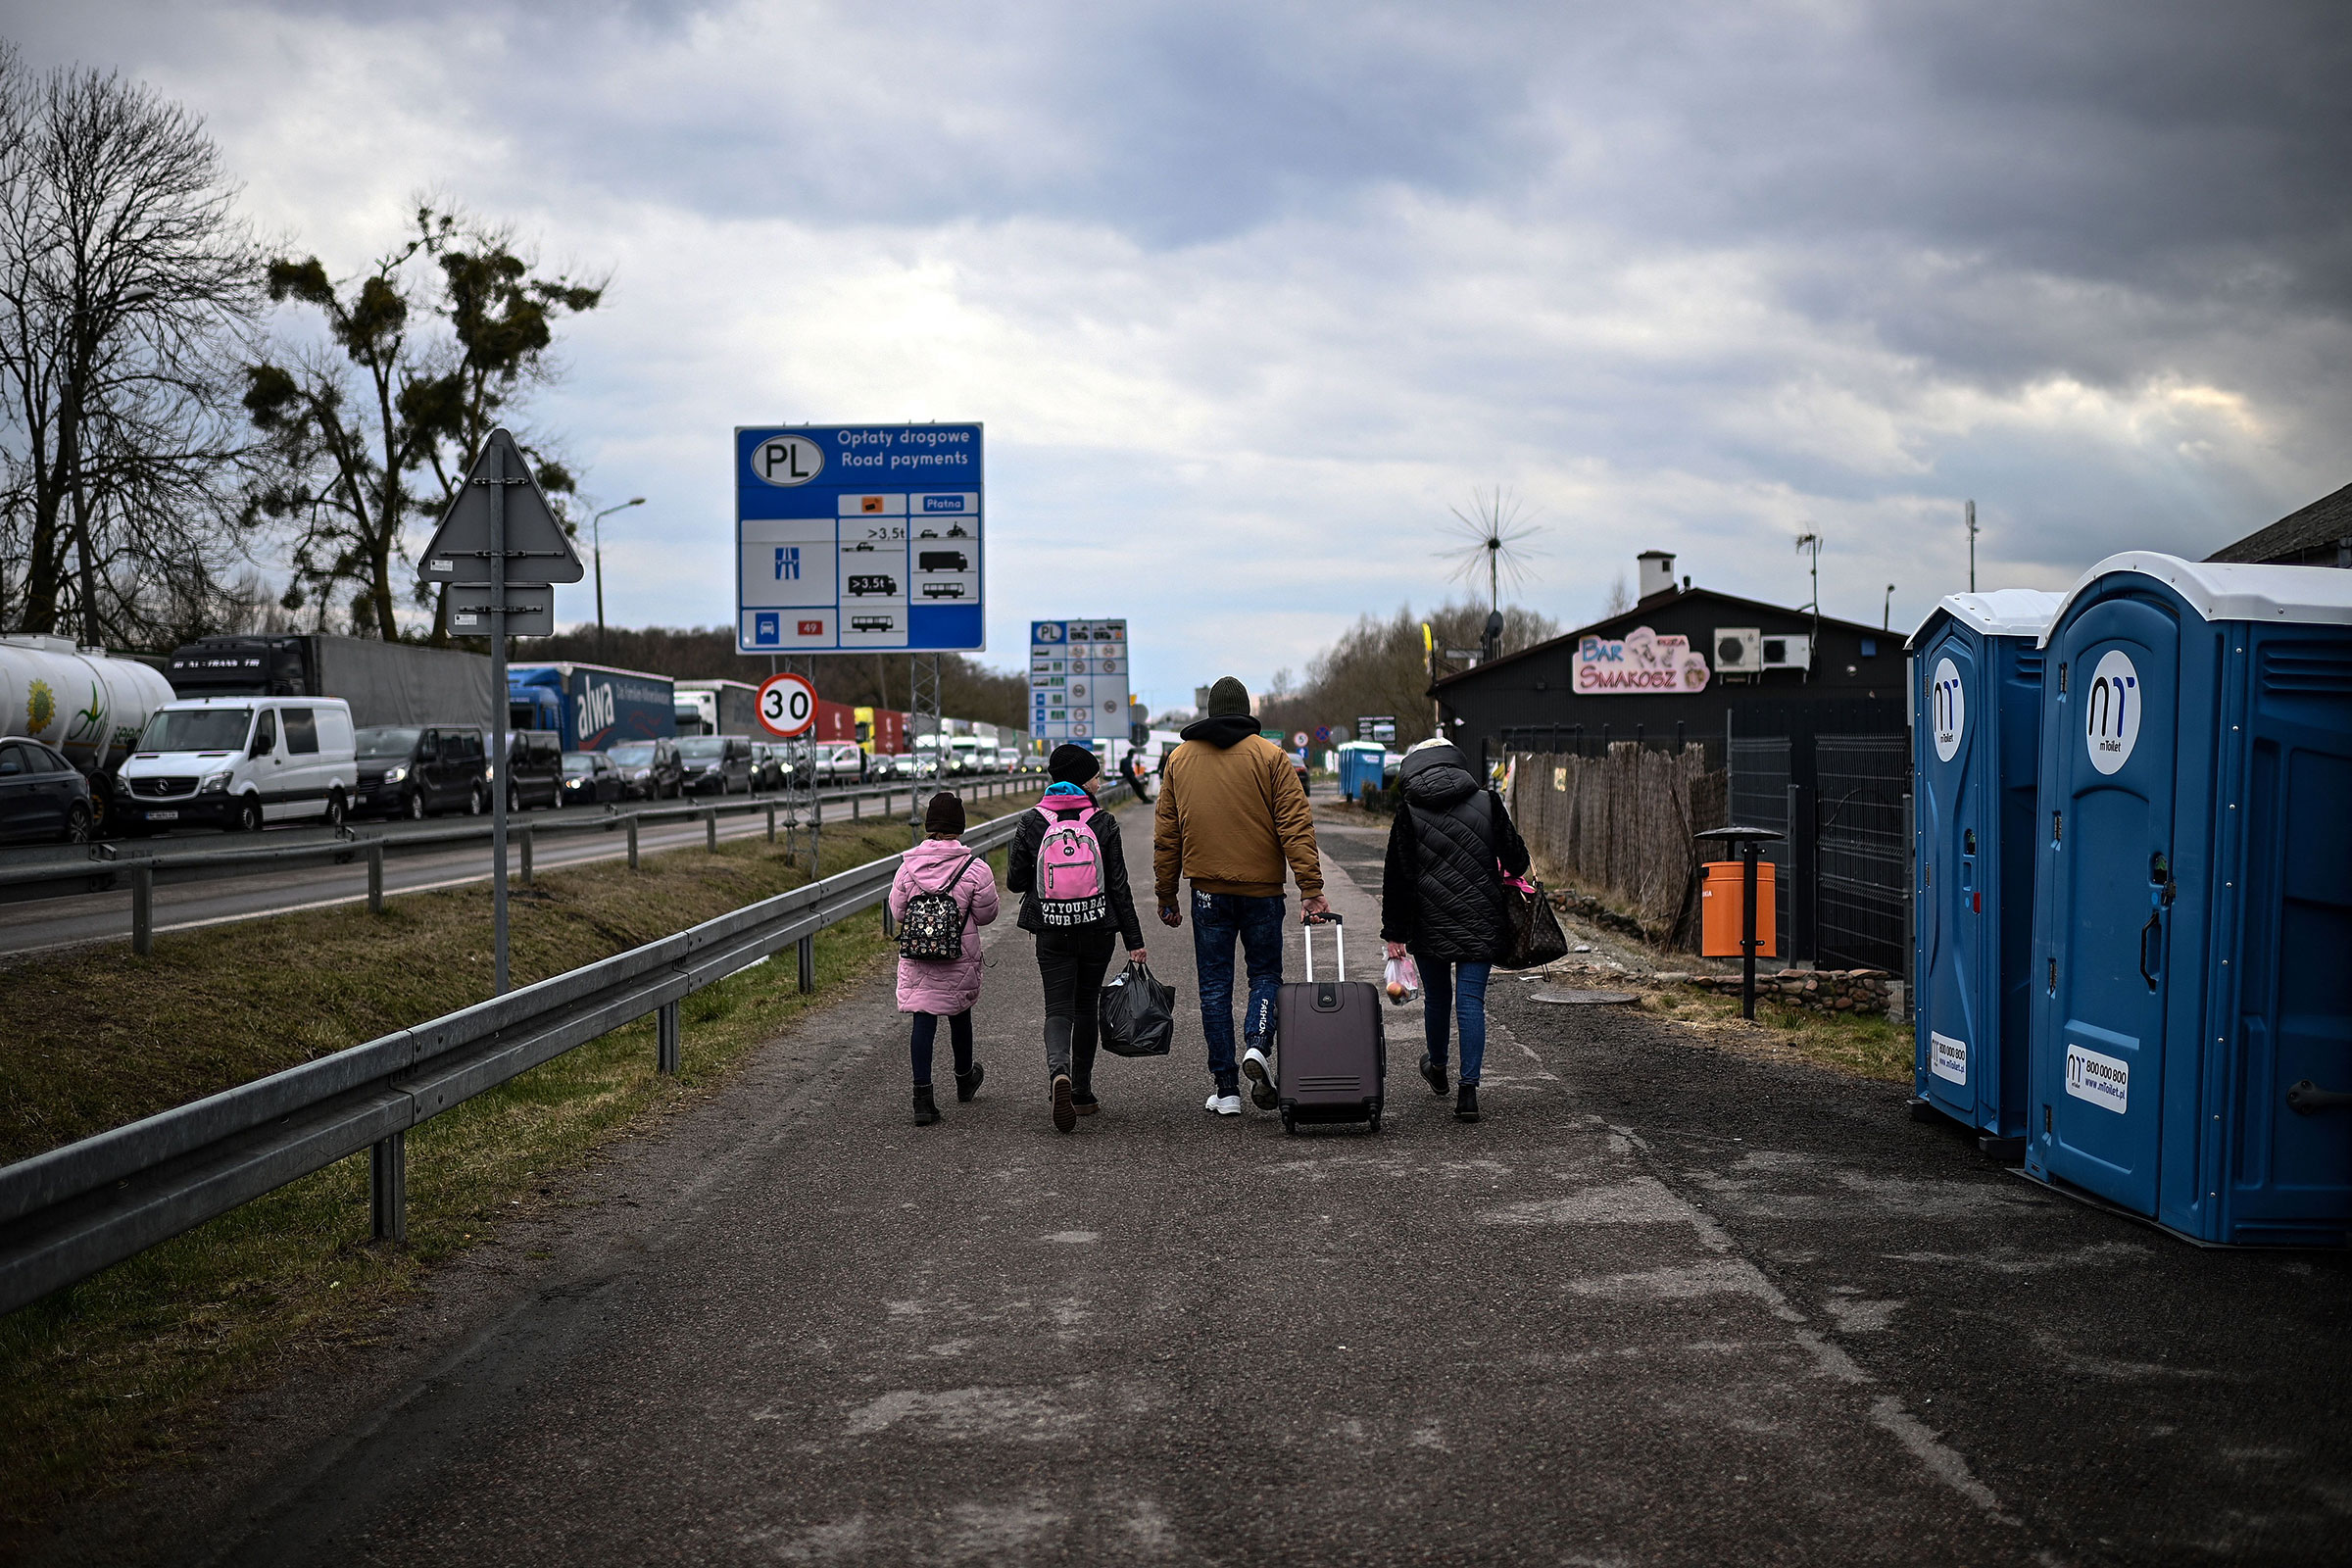 Ukrainian refugees Julia and Miroslava walk away with relatives (R) who picked them up after they crossed the Ukrainian-Polish border on their way out of Ukraine at the Dorohusk border crossing, eastern Poland on April 6, 2022. (Christophe Archambault—AFP/Getty Images)